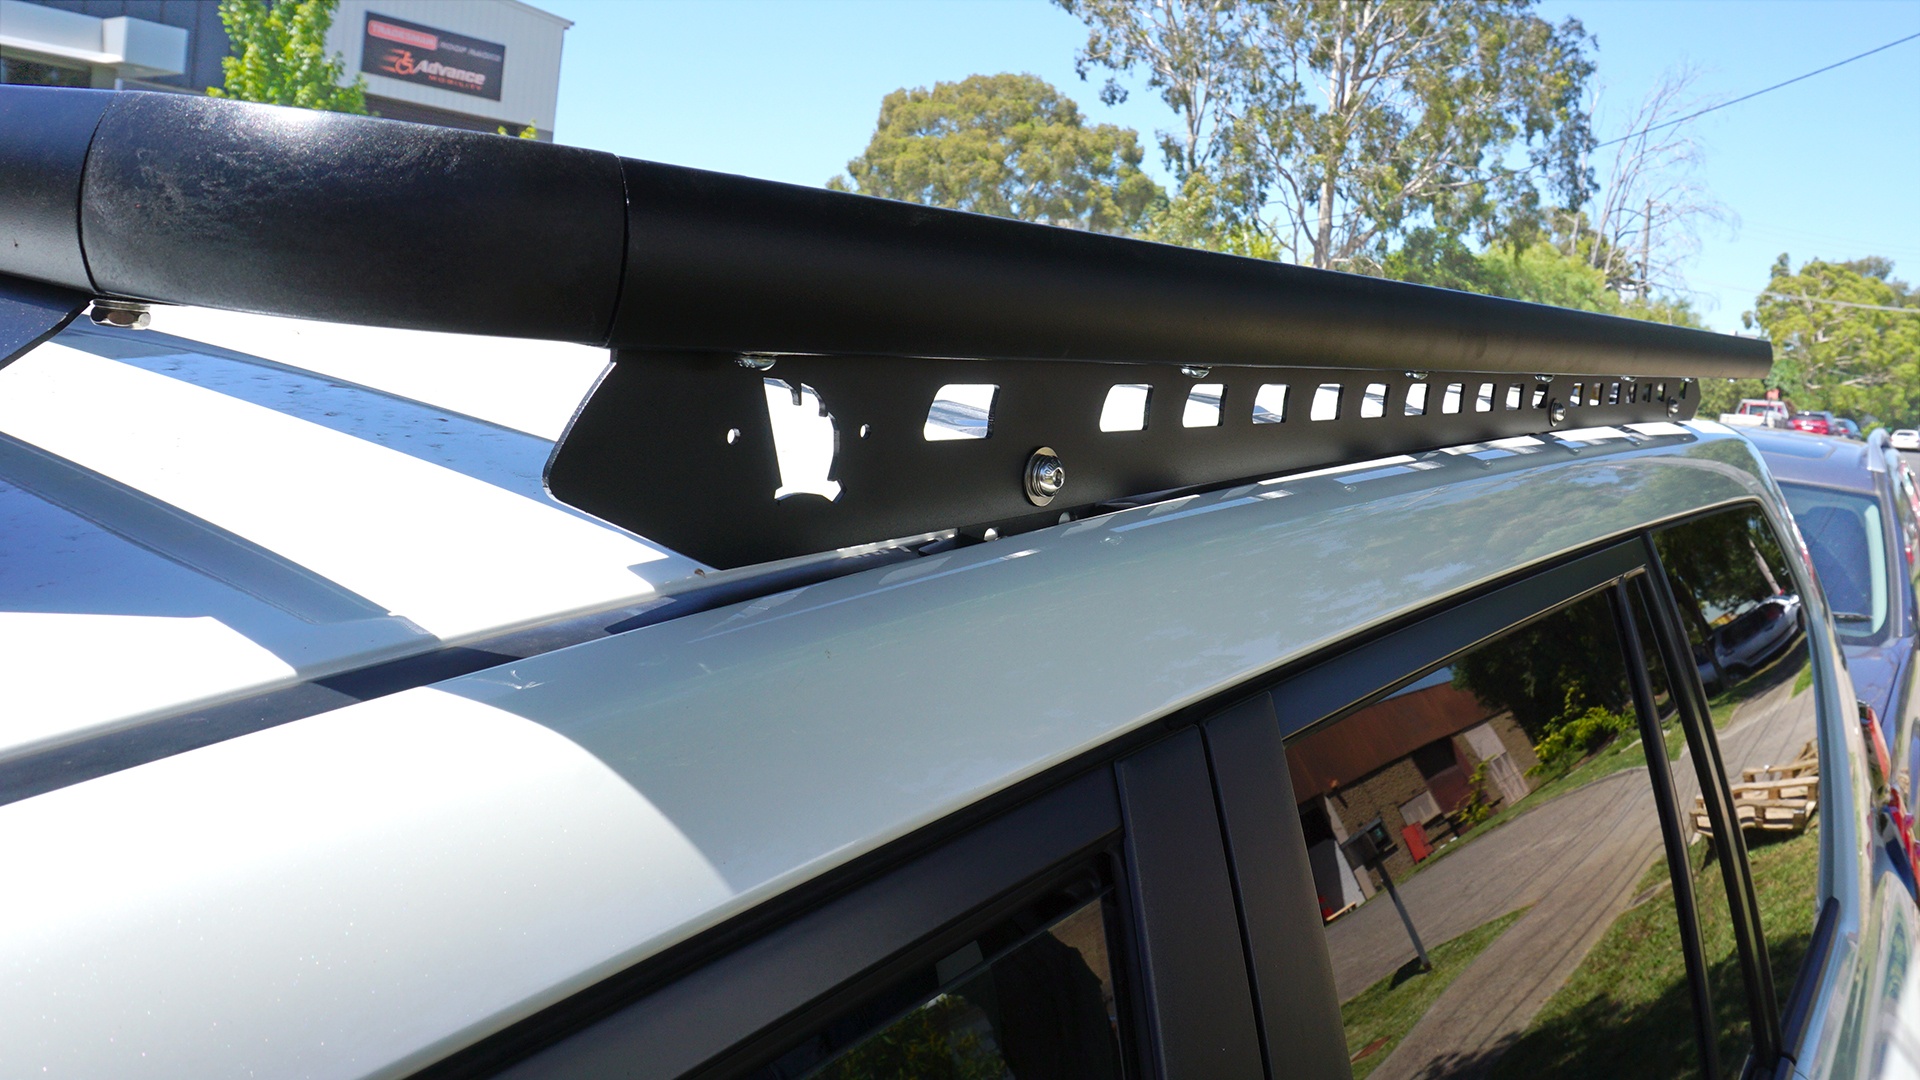 Toyota Prado 150 Series with a Wedgetail roof rack installed.